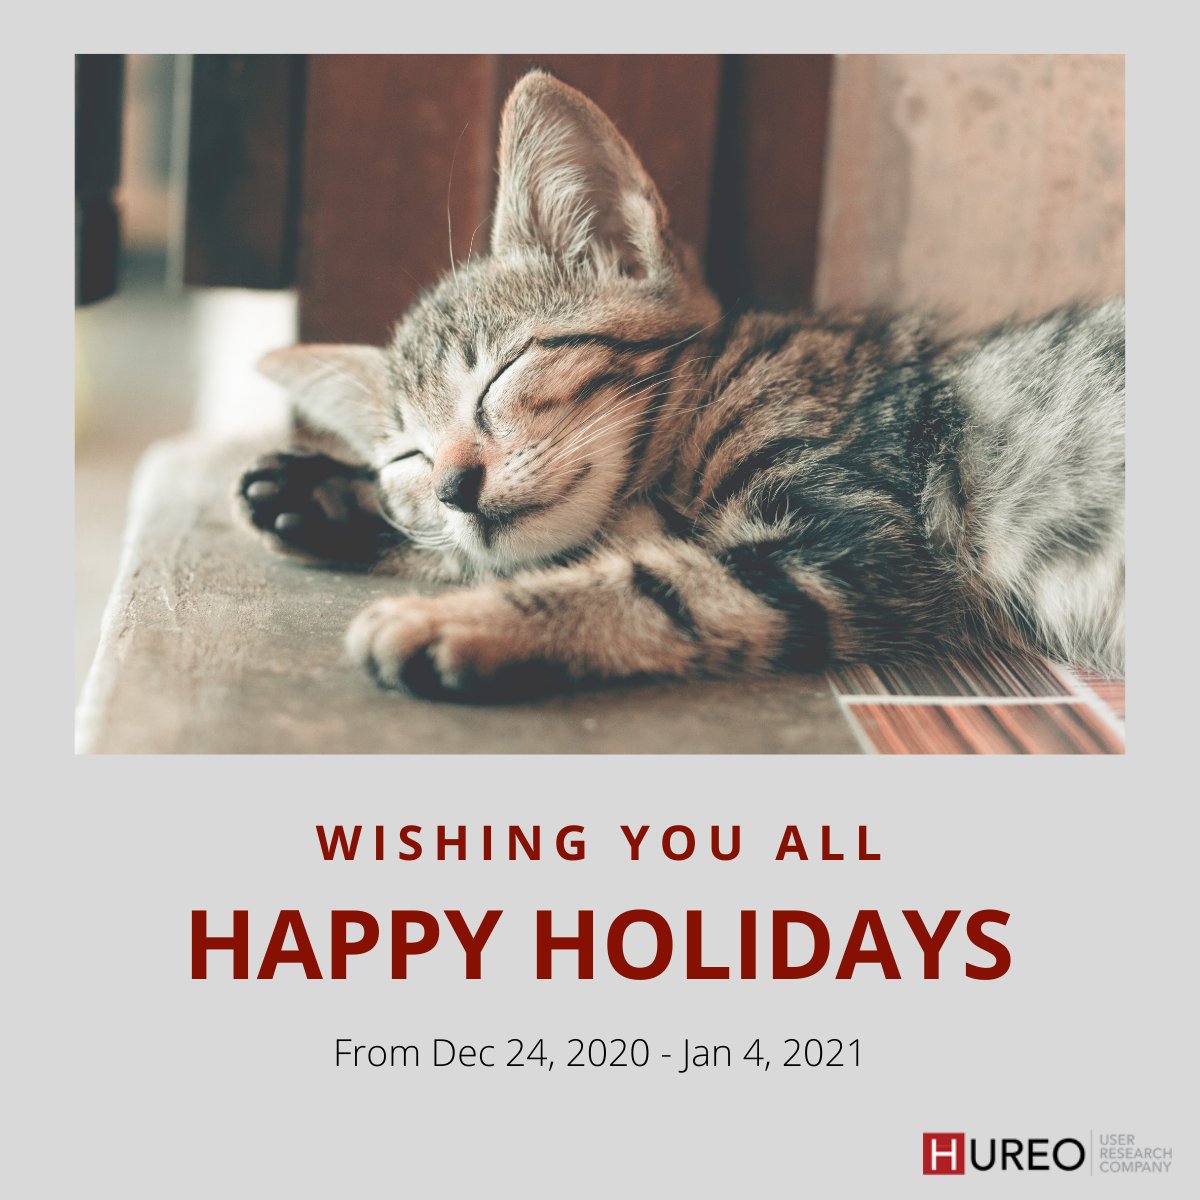 As we near the end of an eventful year, we at hureo.com are all set for our annual year-end leave! Thank you for being a part of our journey and we will see you in the new year.

Happy Holidays and a Happy New Year from all of us at Hureo!

#ux #uxresearch